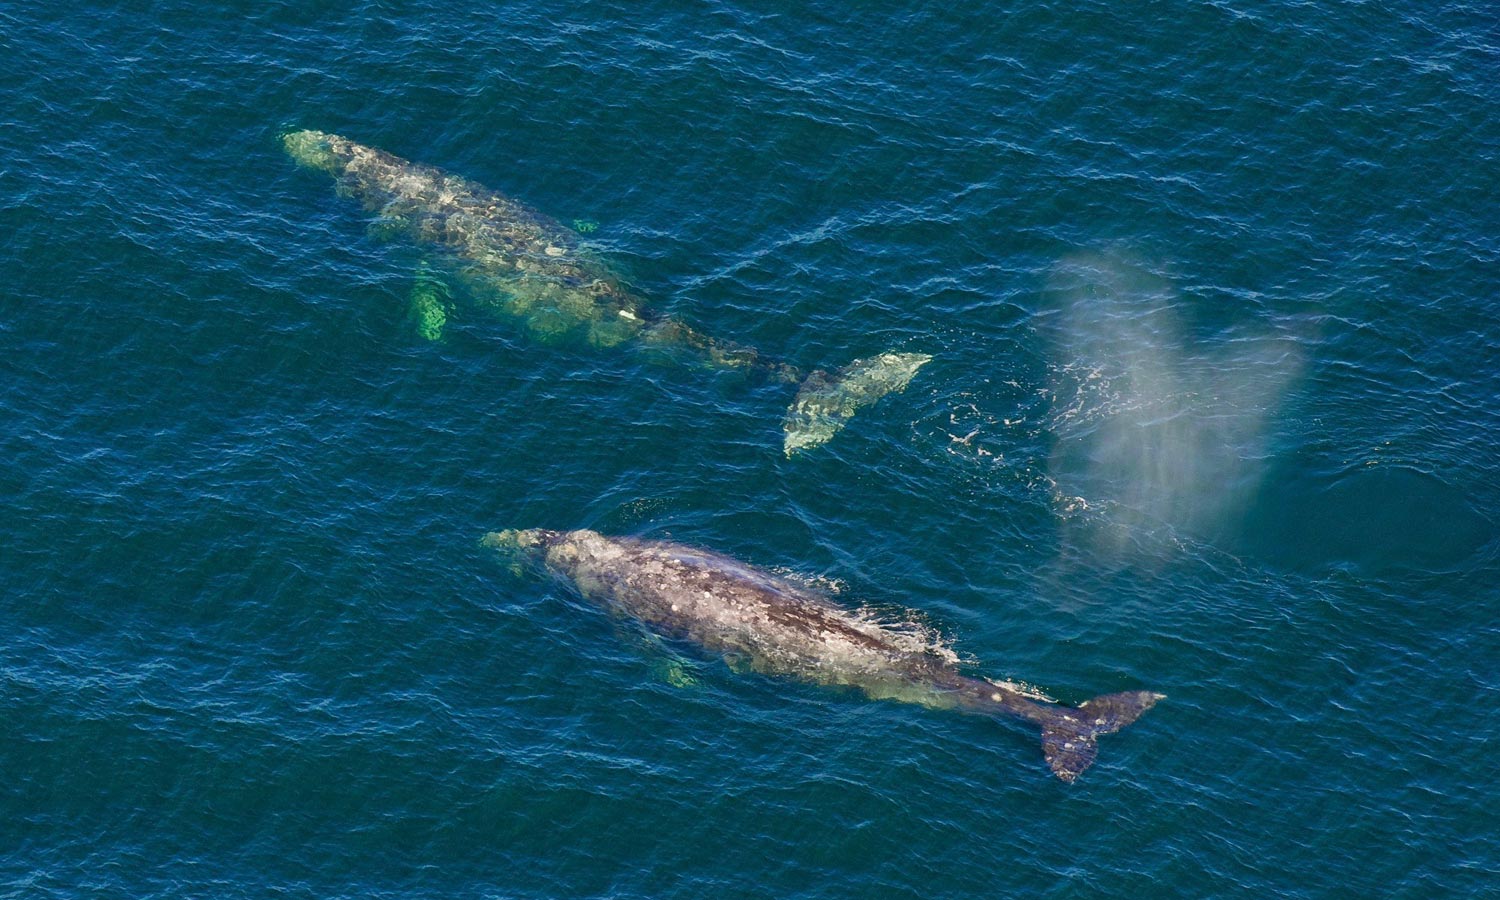 Aerial Whales